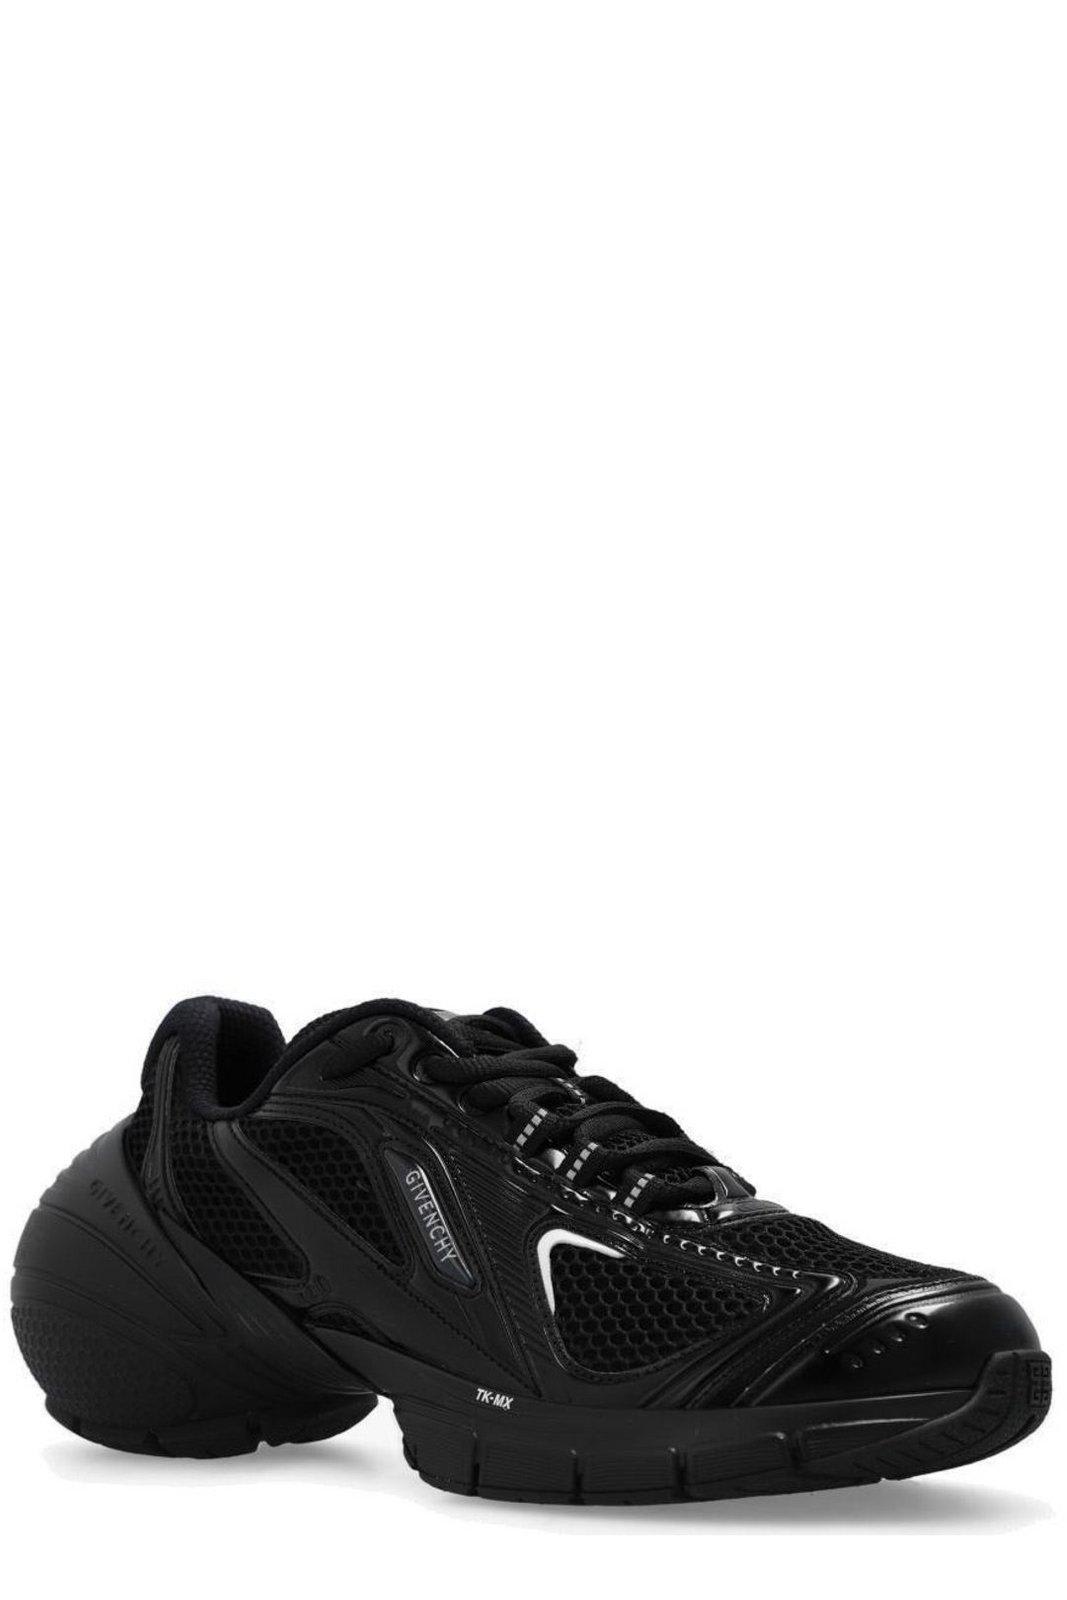 Shop Givenchy Tk-mx Runner Lace-up Sneakers In Black